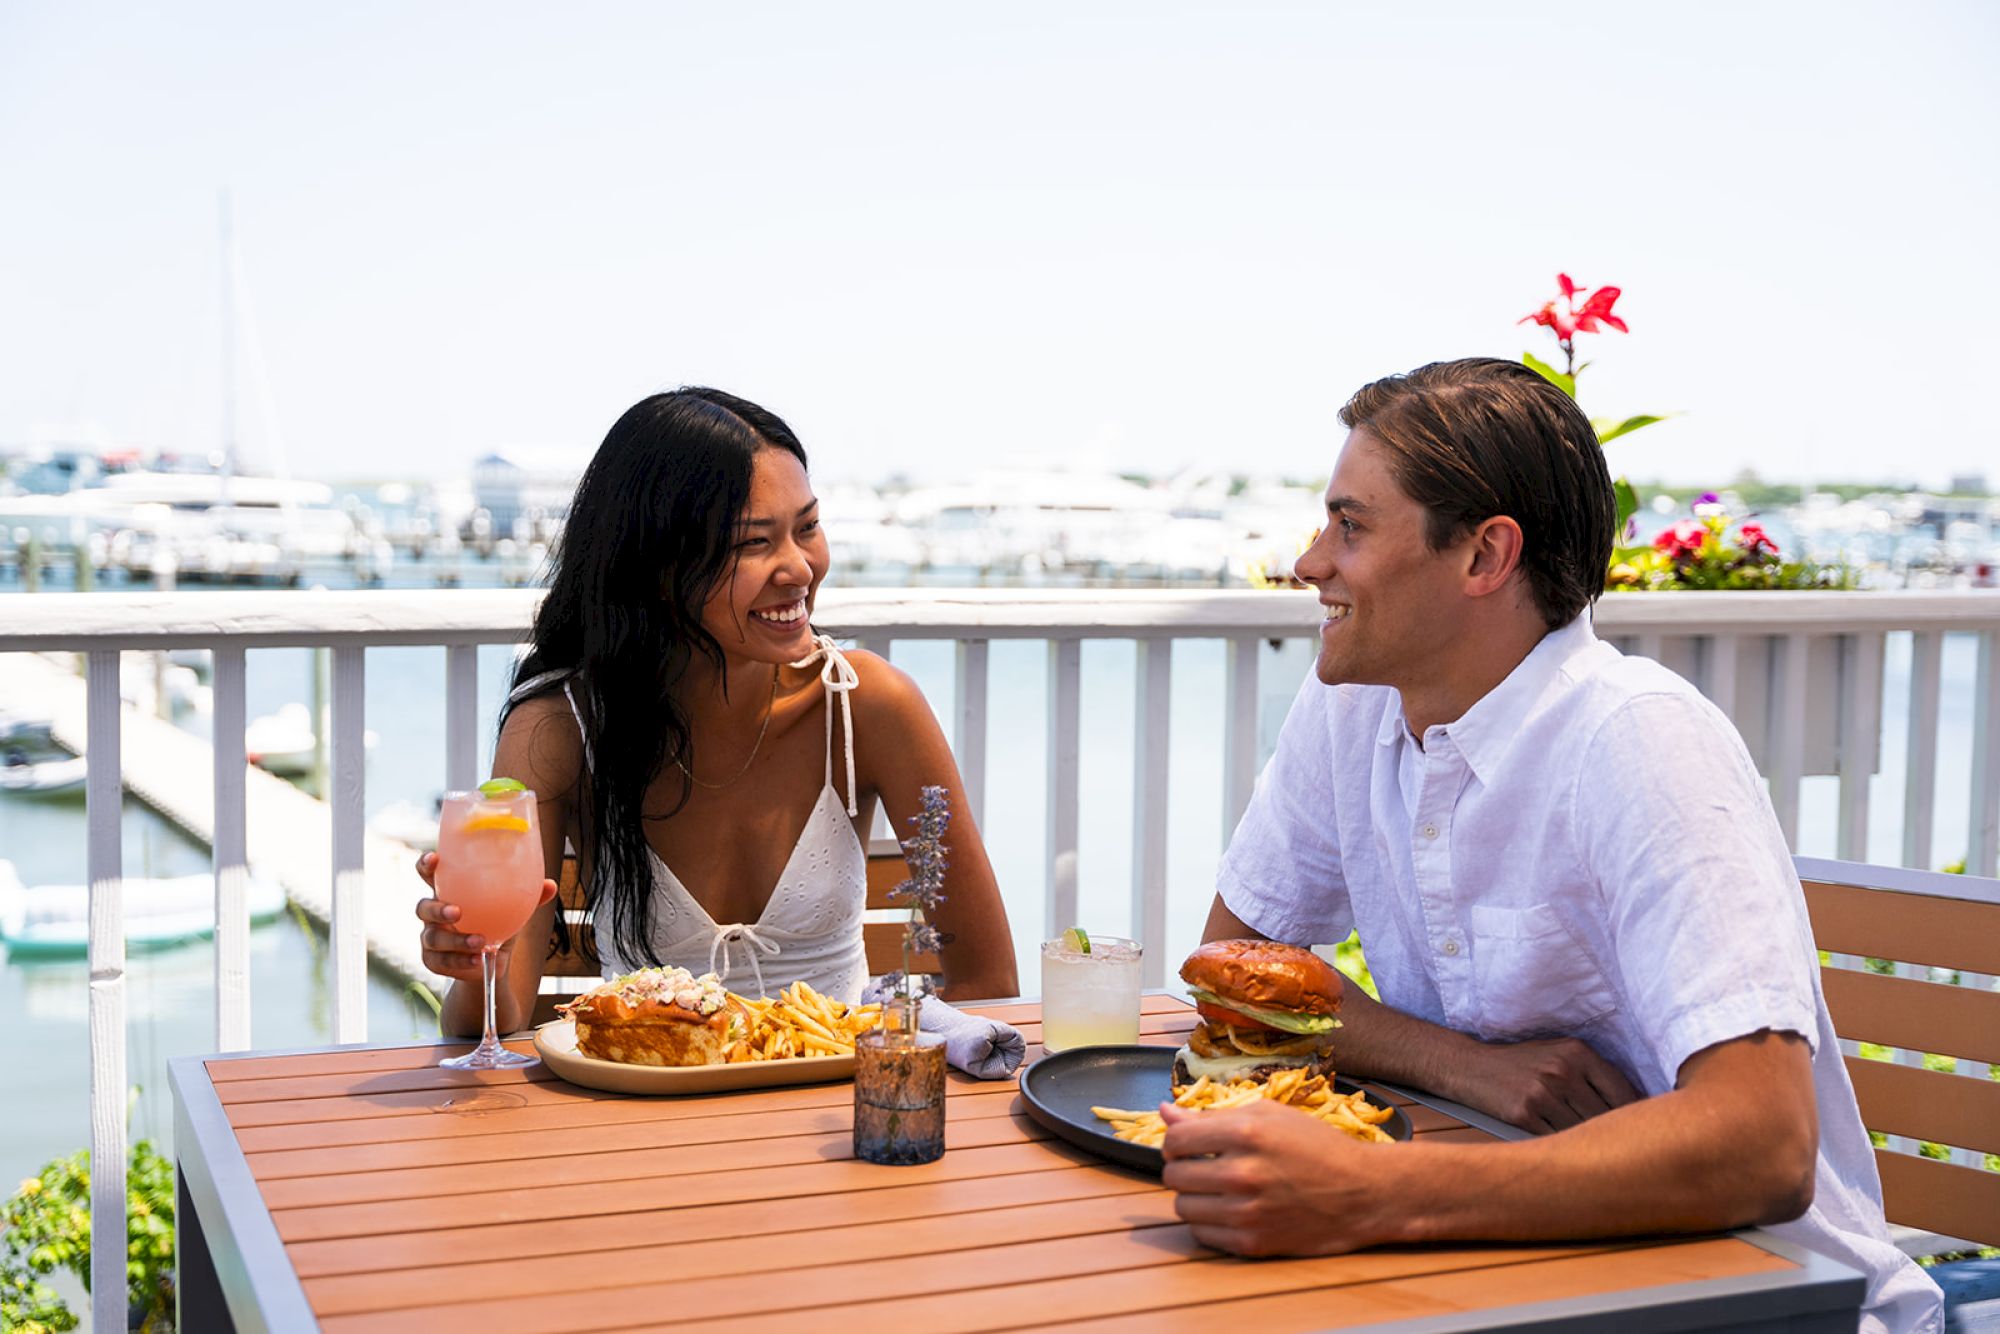 A smiling couple enjoys a meal with fries and drinks at an outdoor seaside restaurant, sitting on a wooden deck with a view of boats in the background.